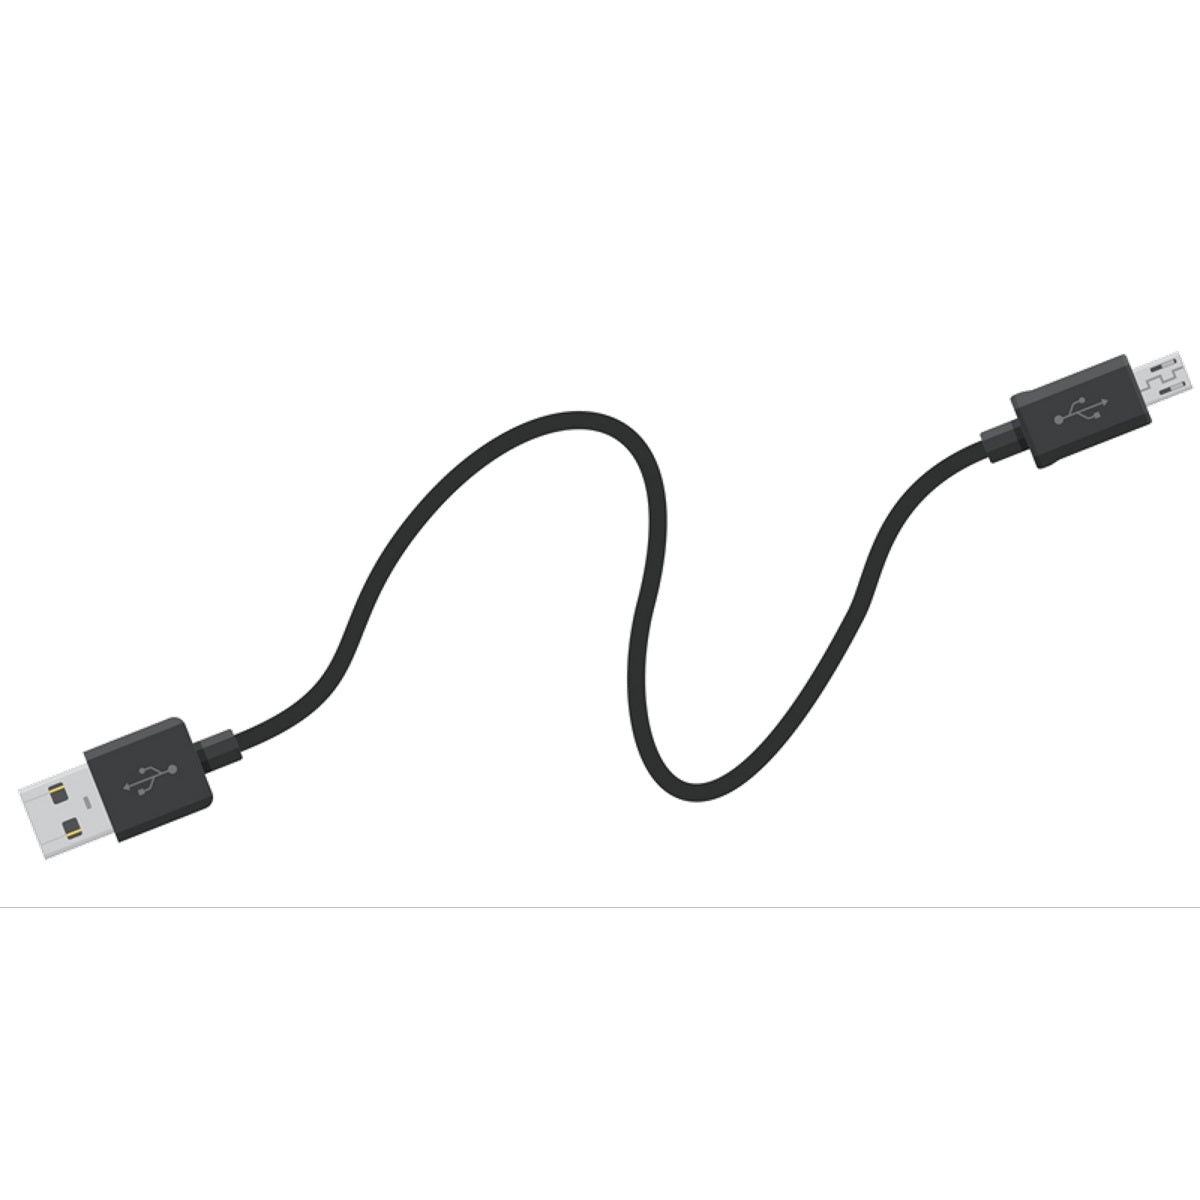 Optrel Panoramaxx Micro USB Charging Cable (5010.001)